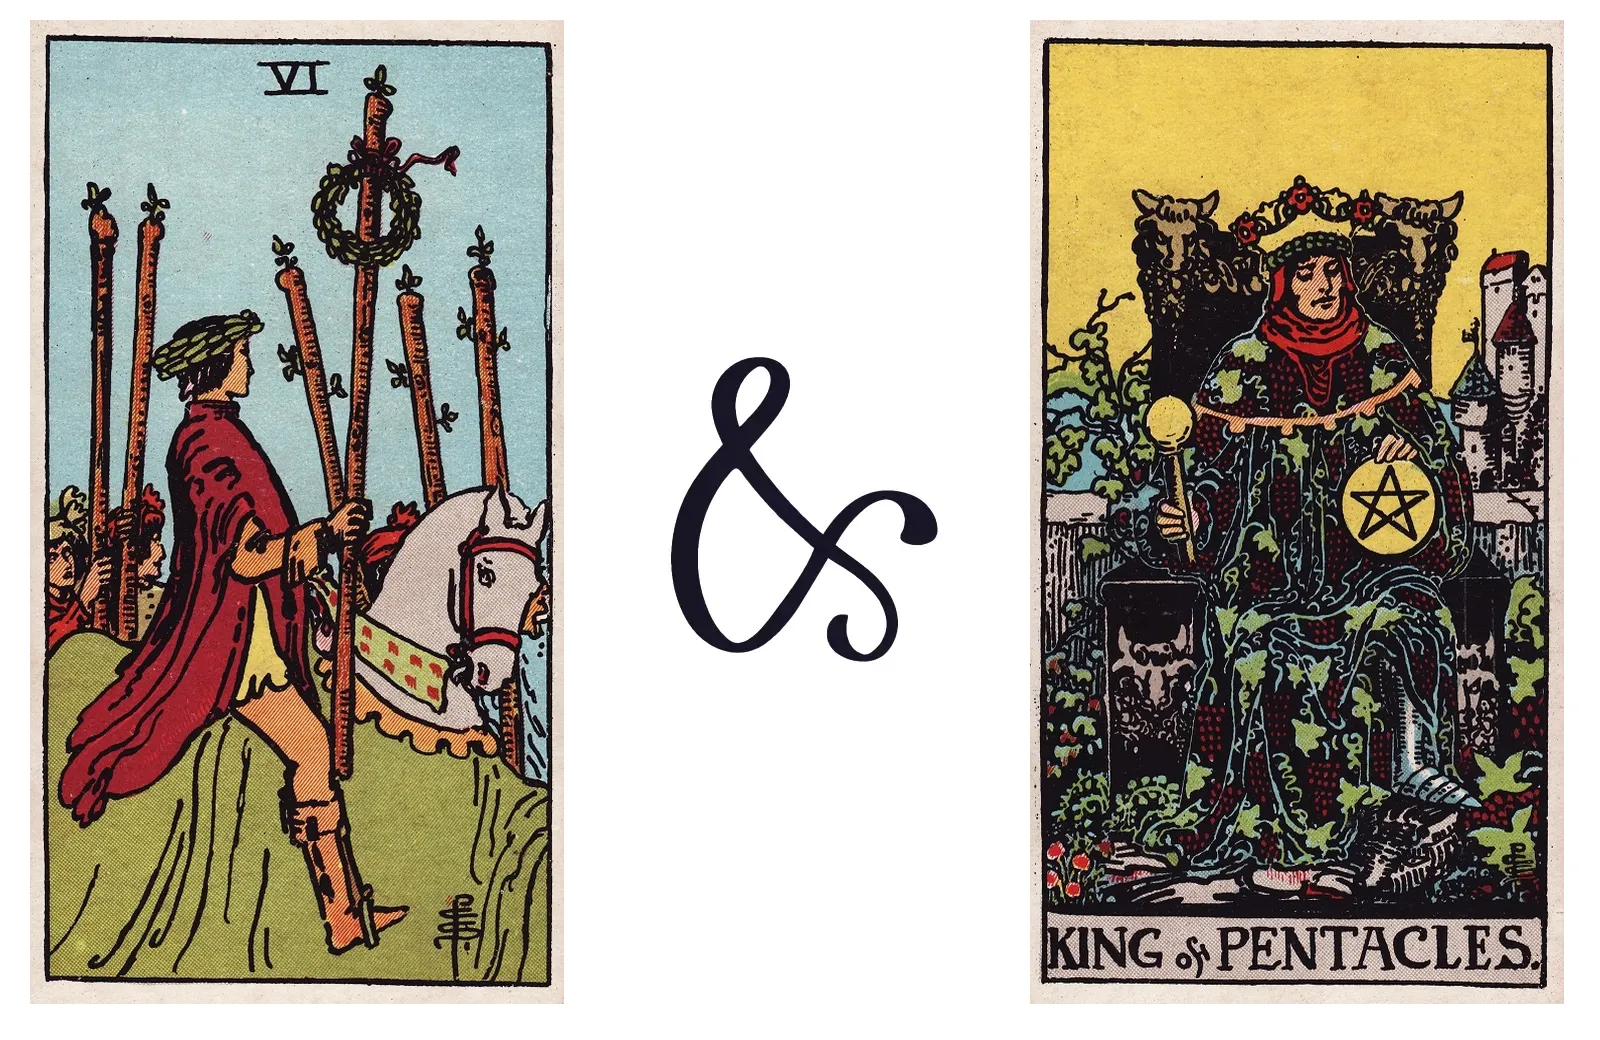 Six of Wands and King of Pentacles